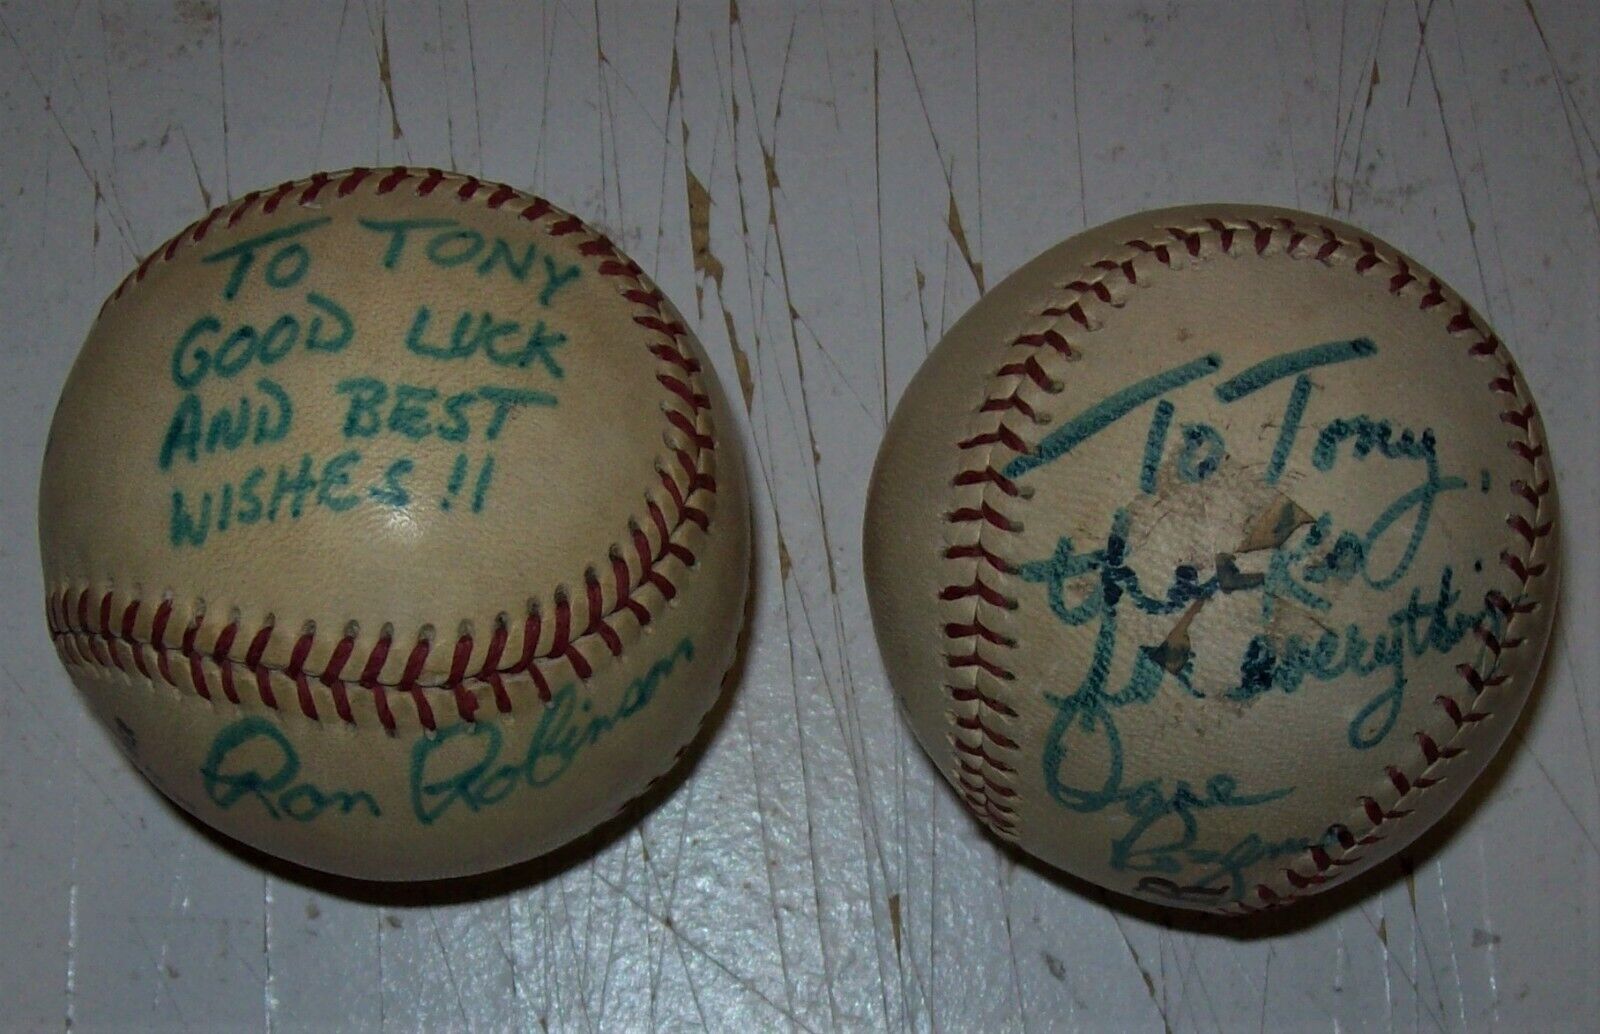 LOT OF 4 DIFF. AUTOGRAPHED BB's: S.YEAGER, R.ROBINSON; R.CERONE; D.ROZEMA Без бренда - фотография #3